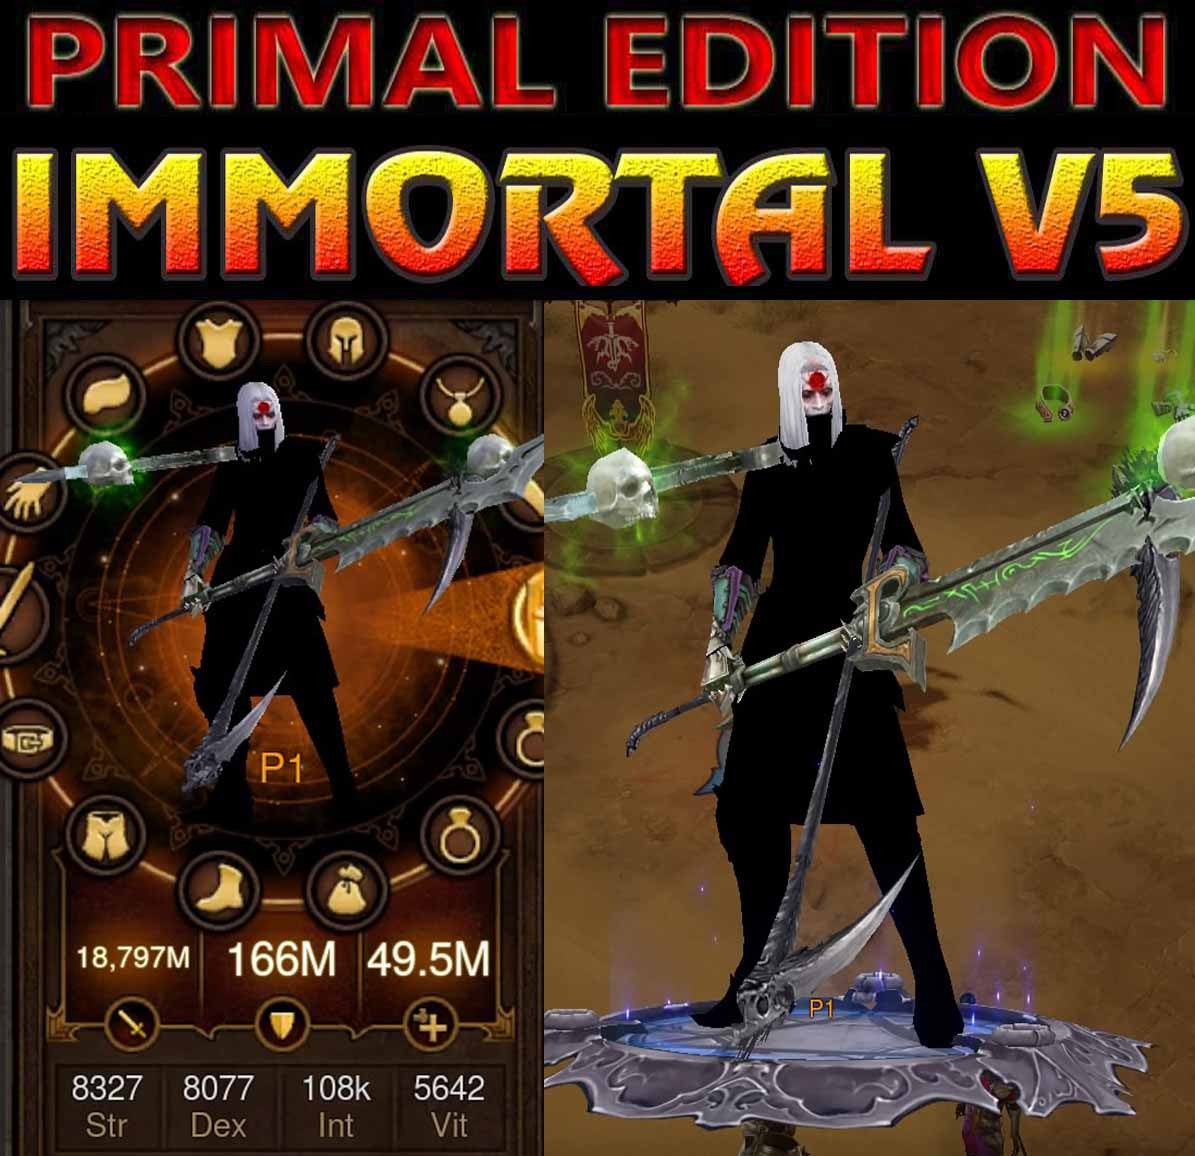 [Primal Ancient] Diablo 3 Immortal v5 Fissure Modded Necromancer TragOuls Set Diablo 3 Mods ROS Seasonal and Non Seasonal Save Mod - Modded Items and Gear - Hacks - Cheats - Trainers for Playstation 4 - Playstation 5 - Nintendo Switch - Xbox One